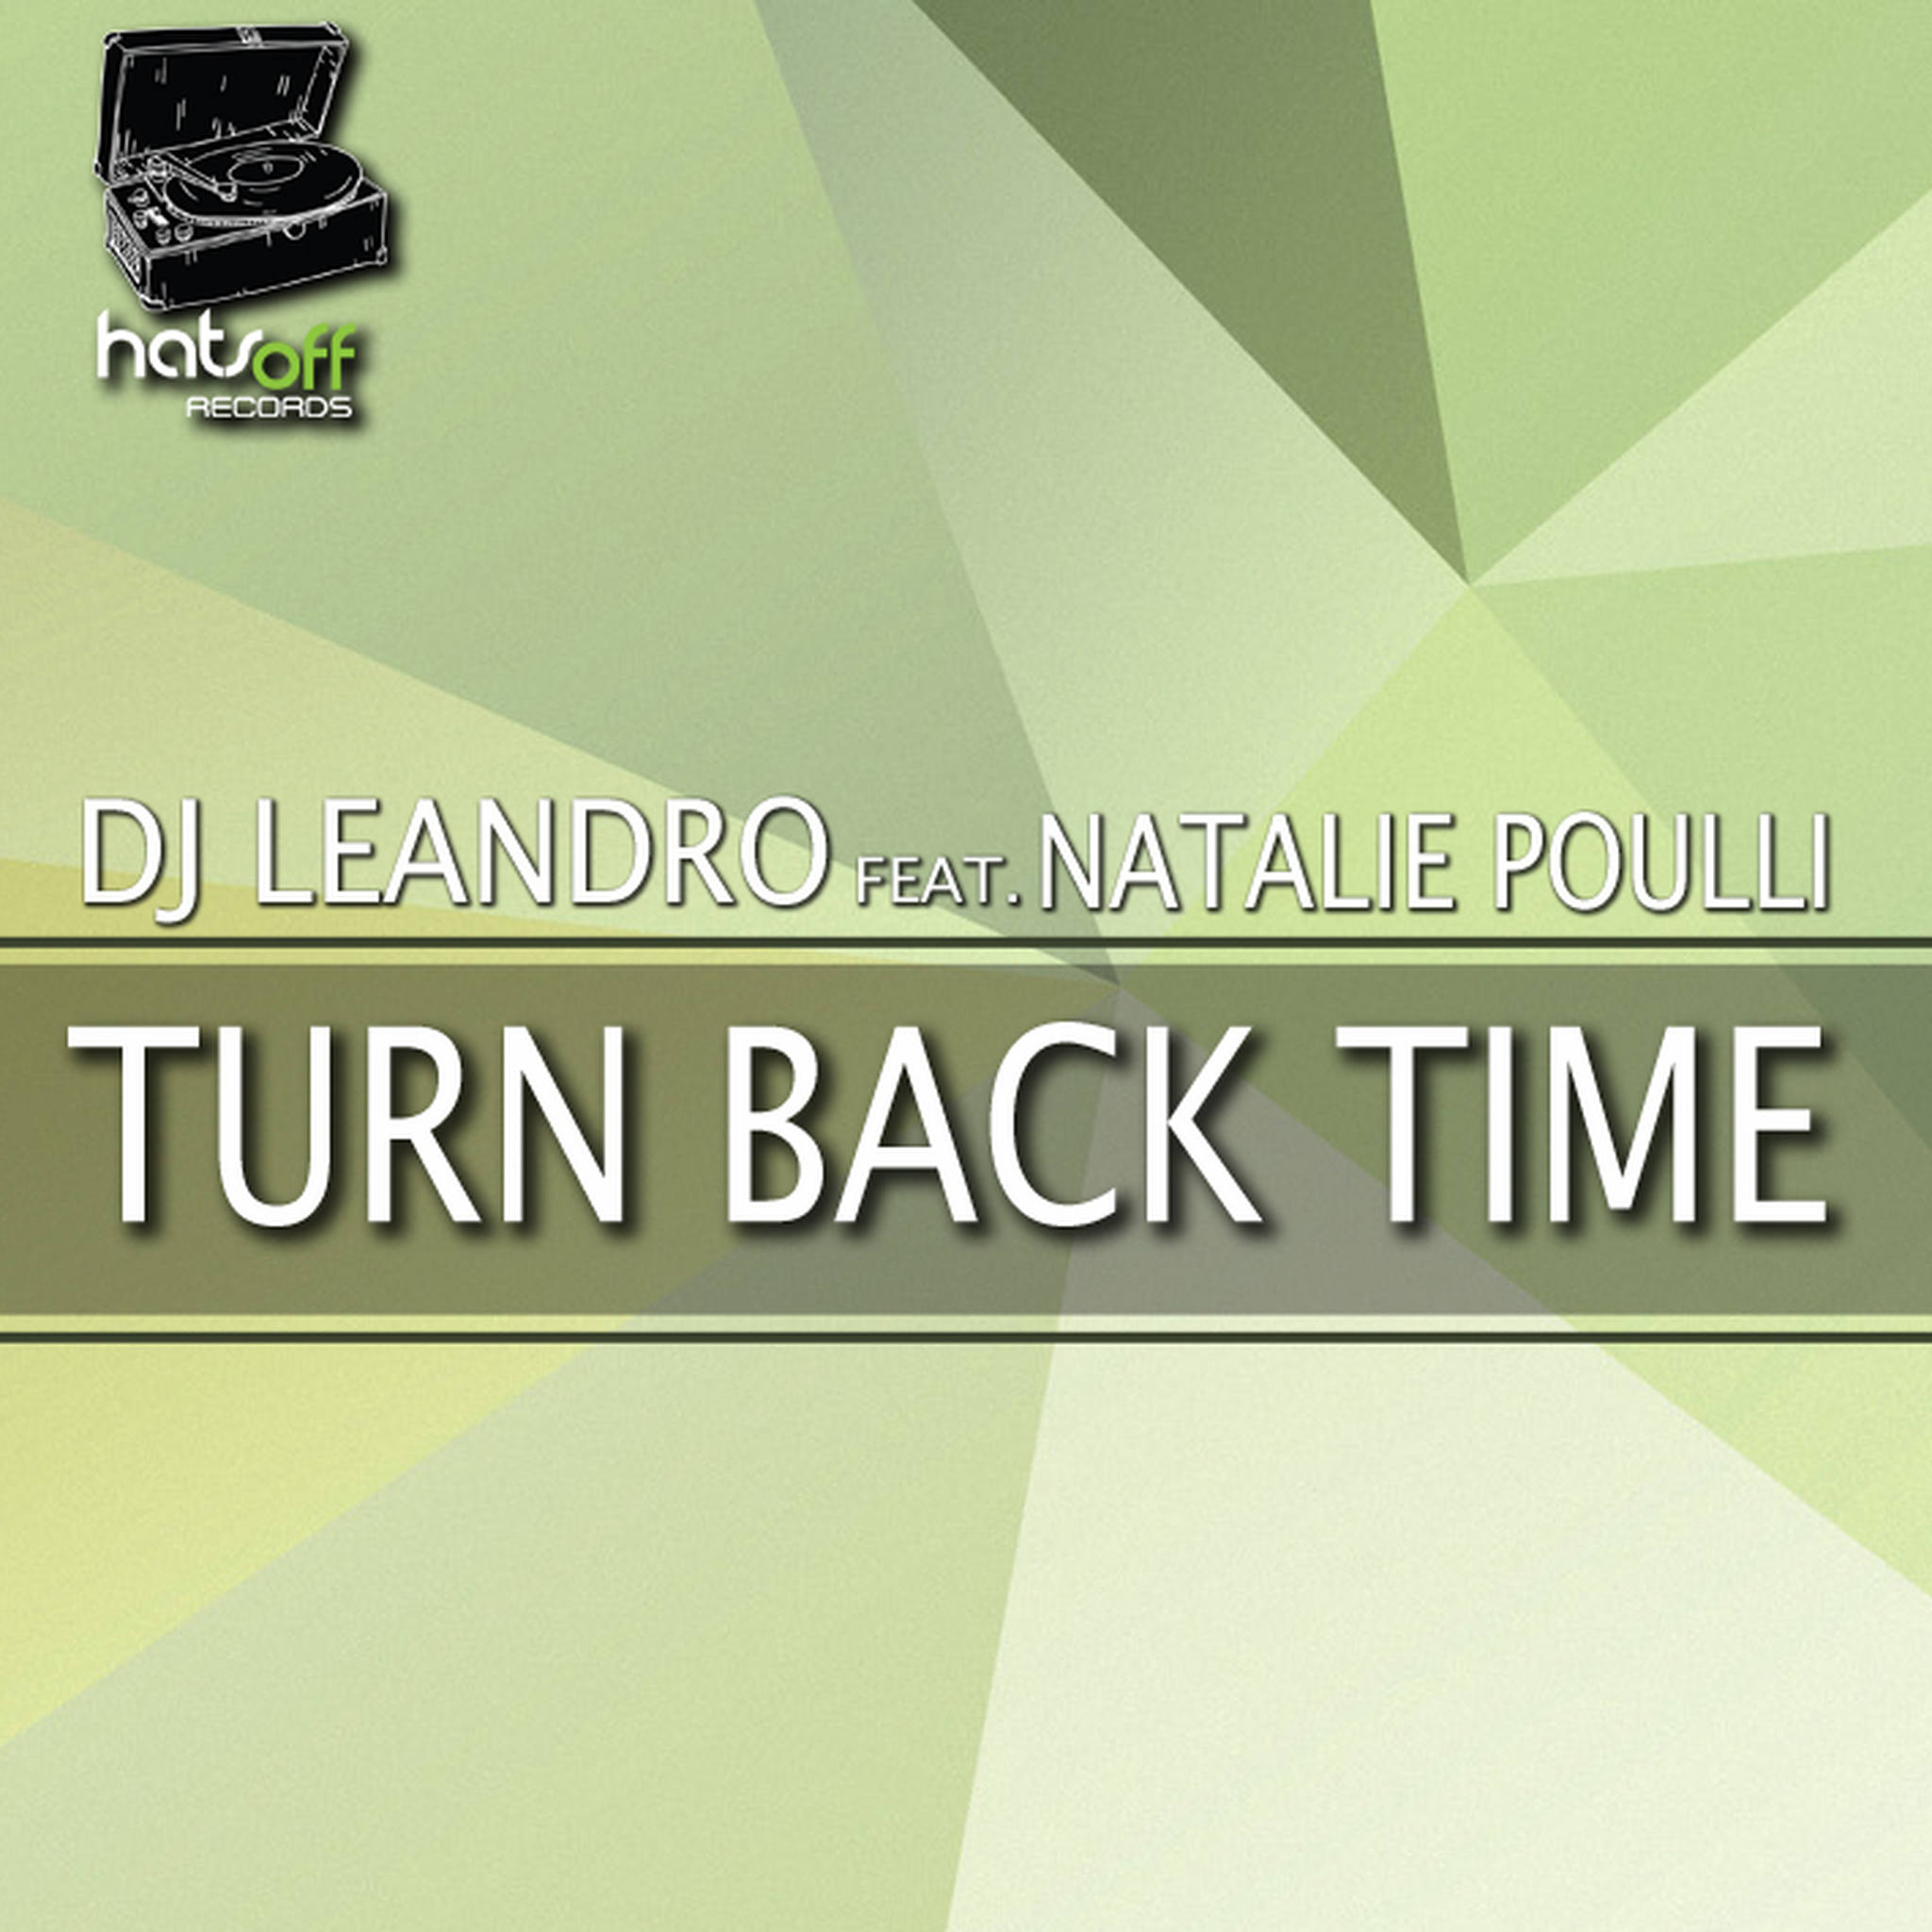 Turn Back Time (Hats Off Records)